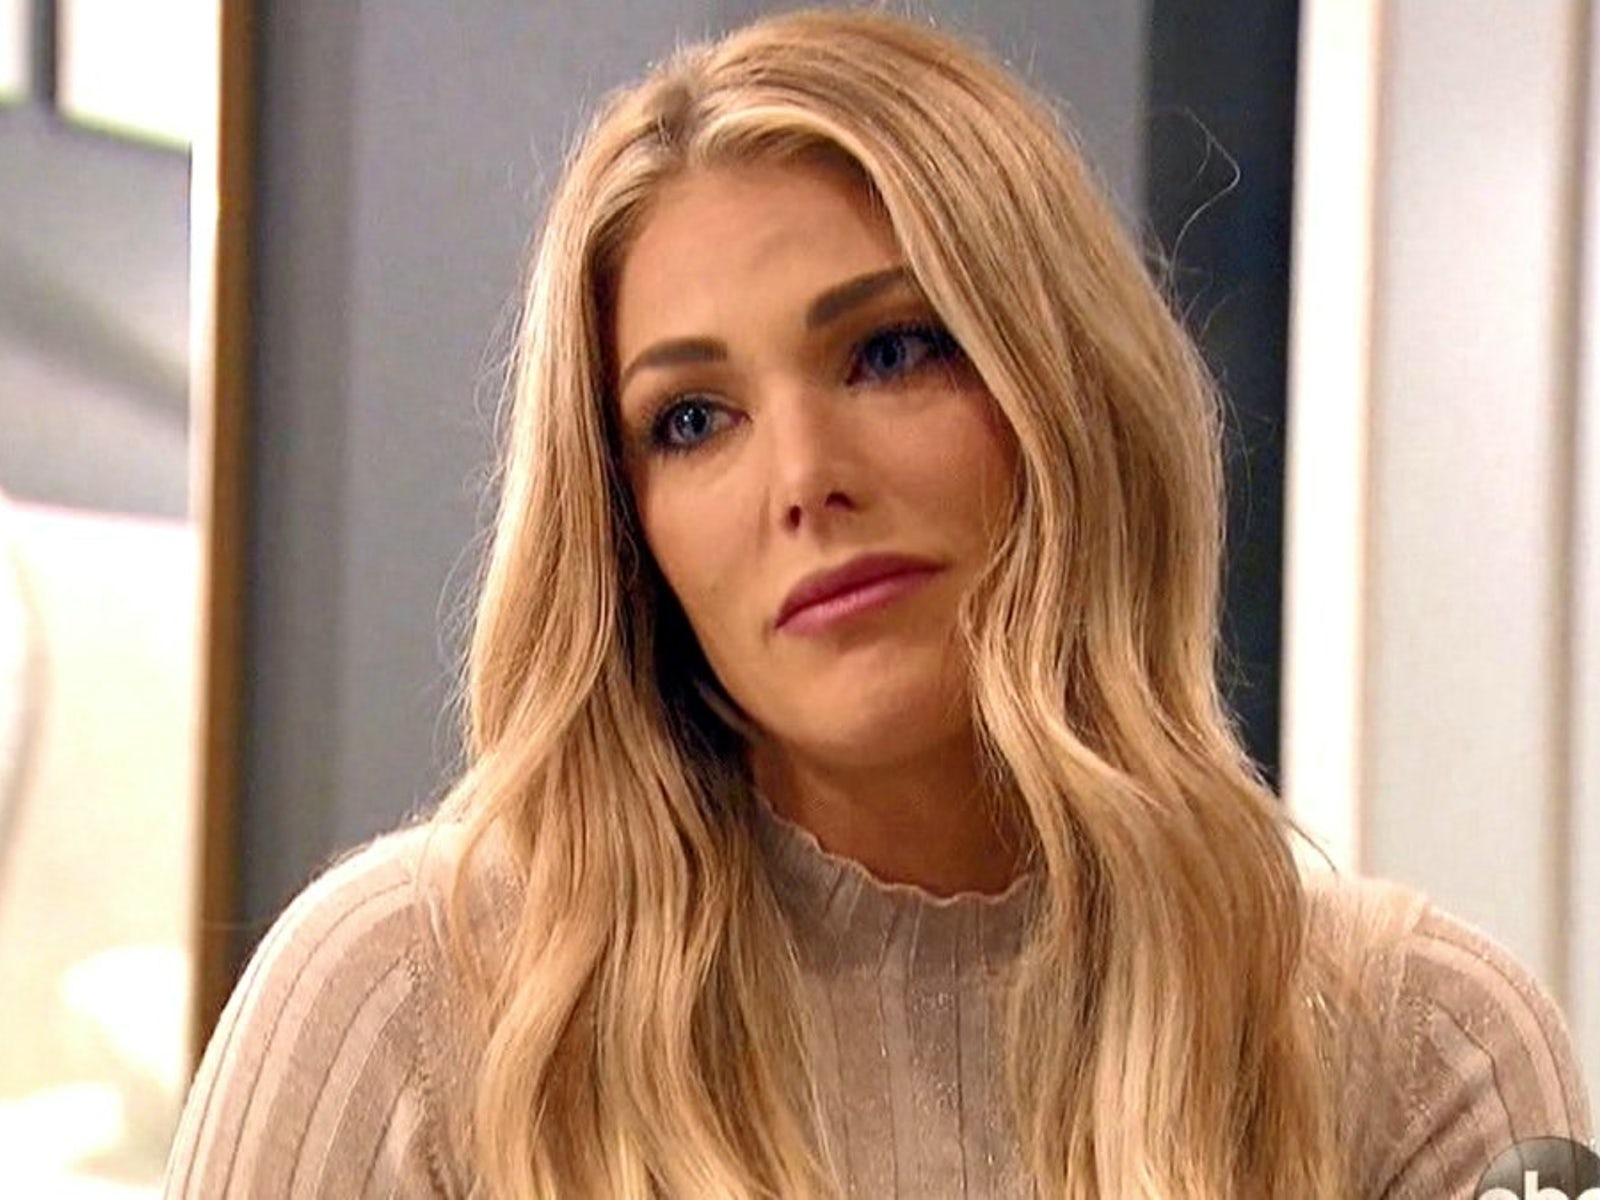 Kelsey Weier 12 things to know about 'The Bachelor' star Peter Weber's